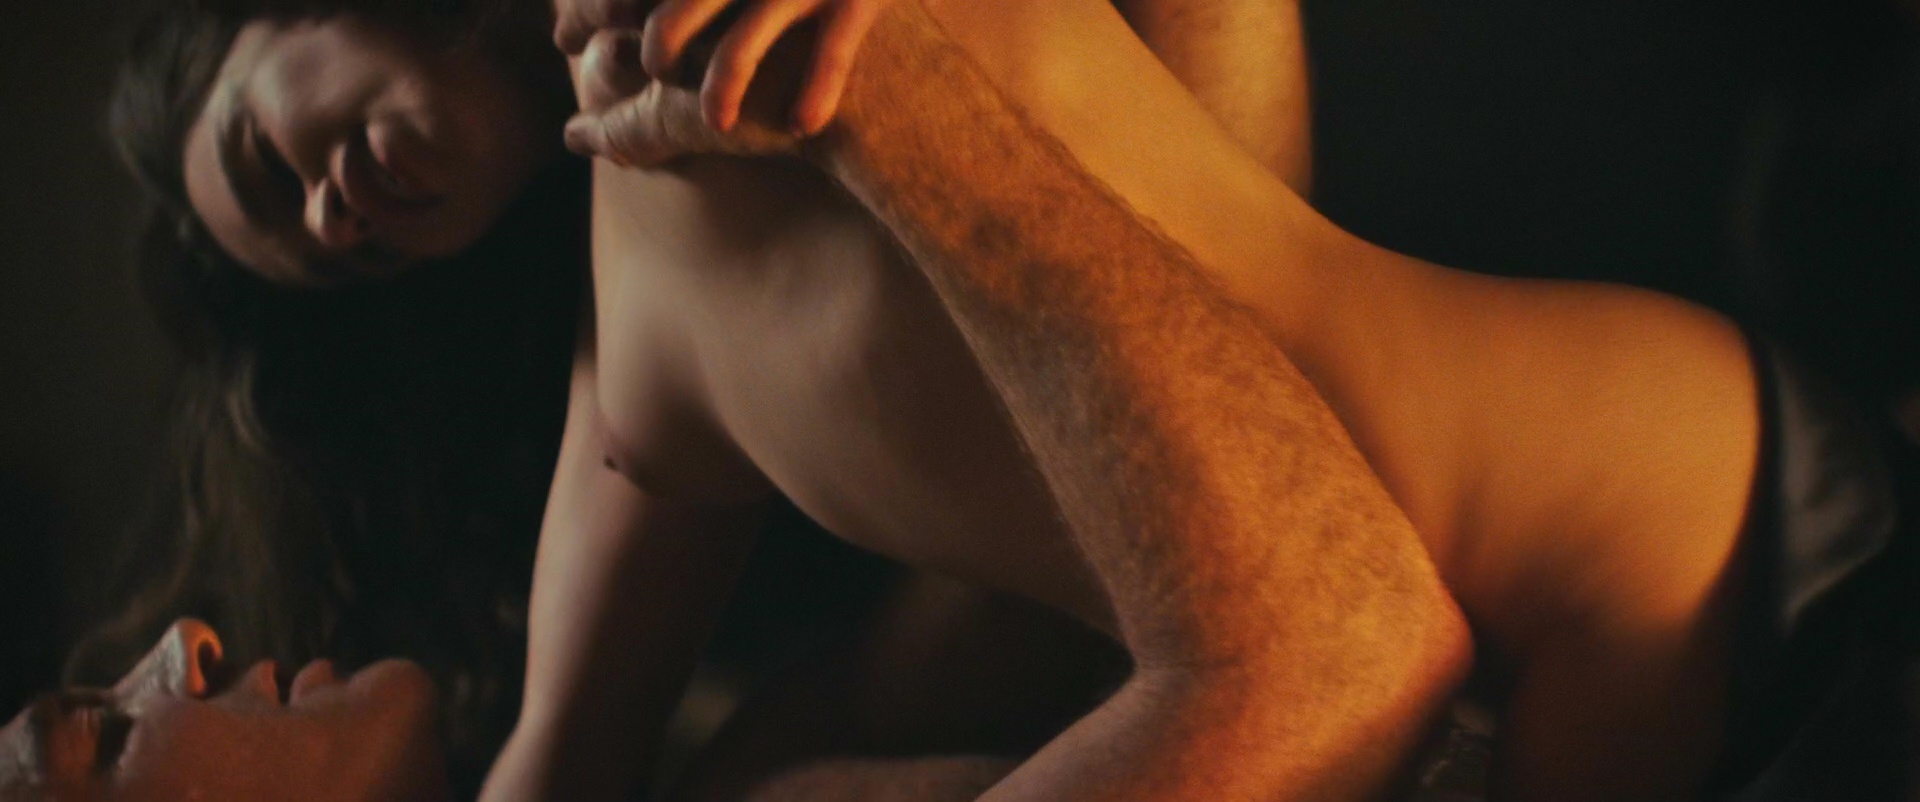 Naked Emilia Clarke In Voice From The Stone